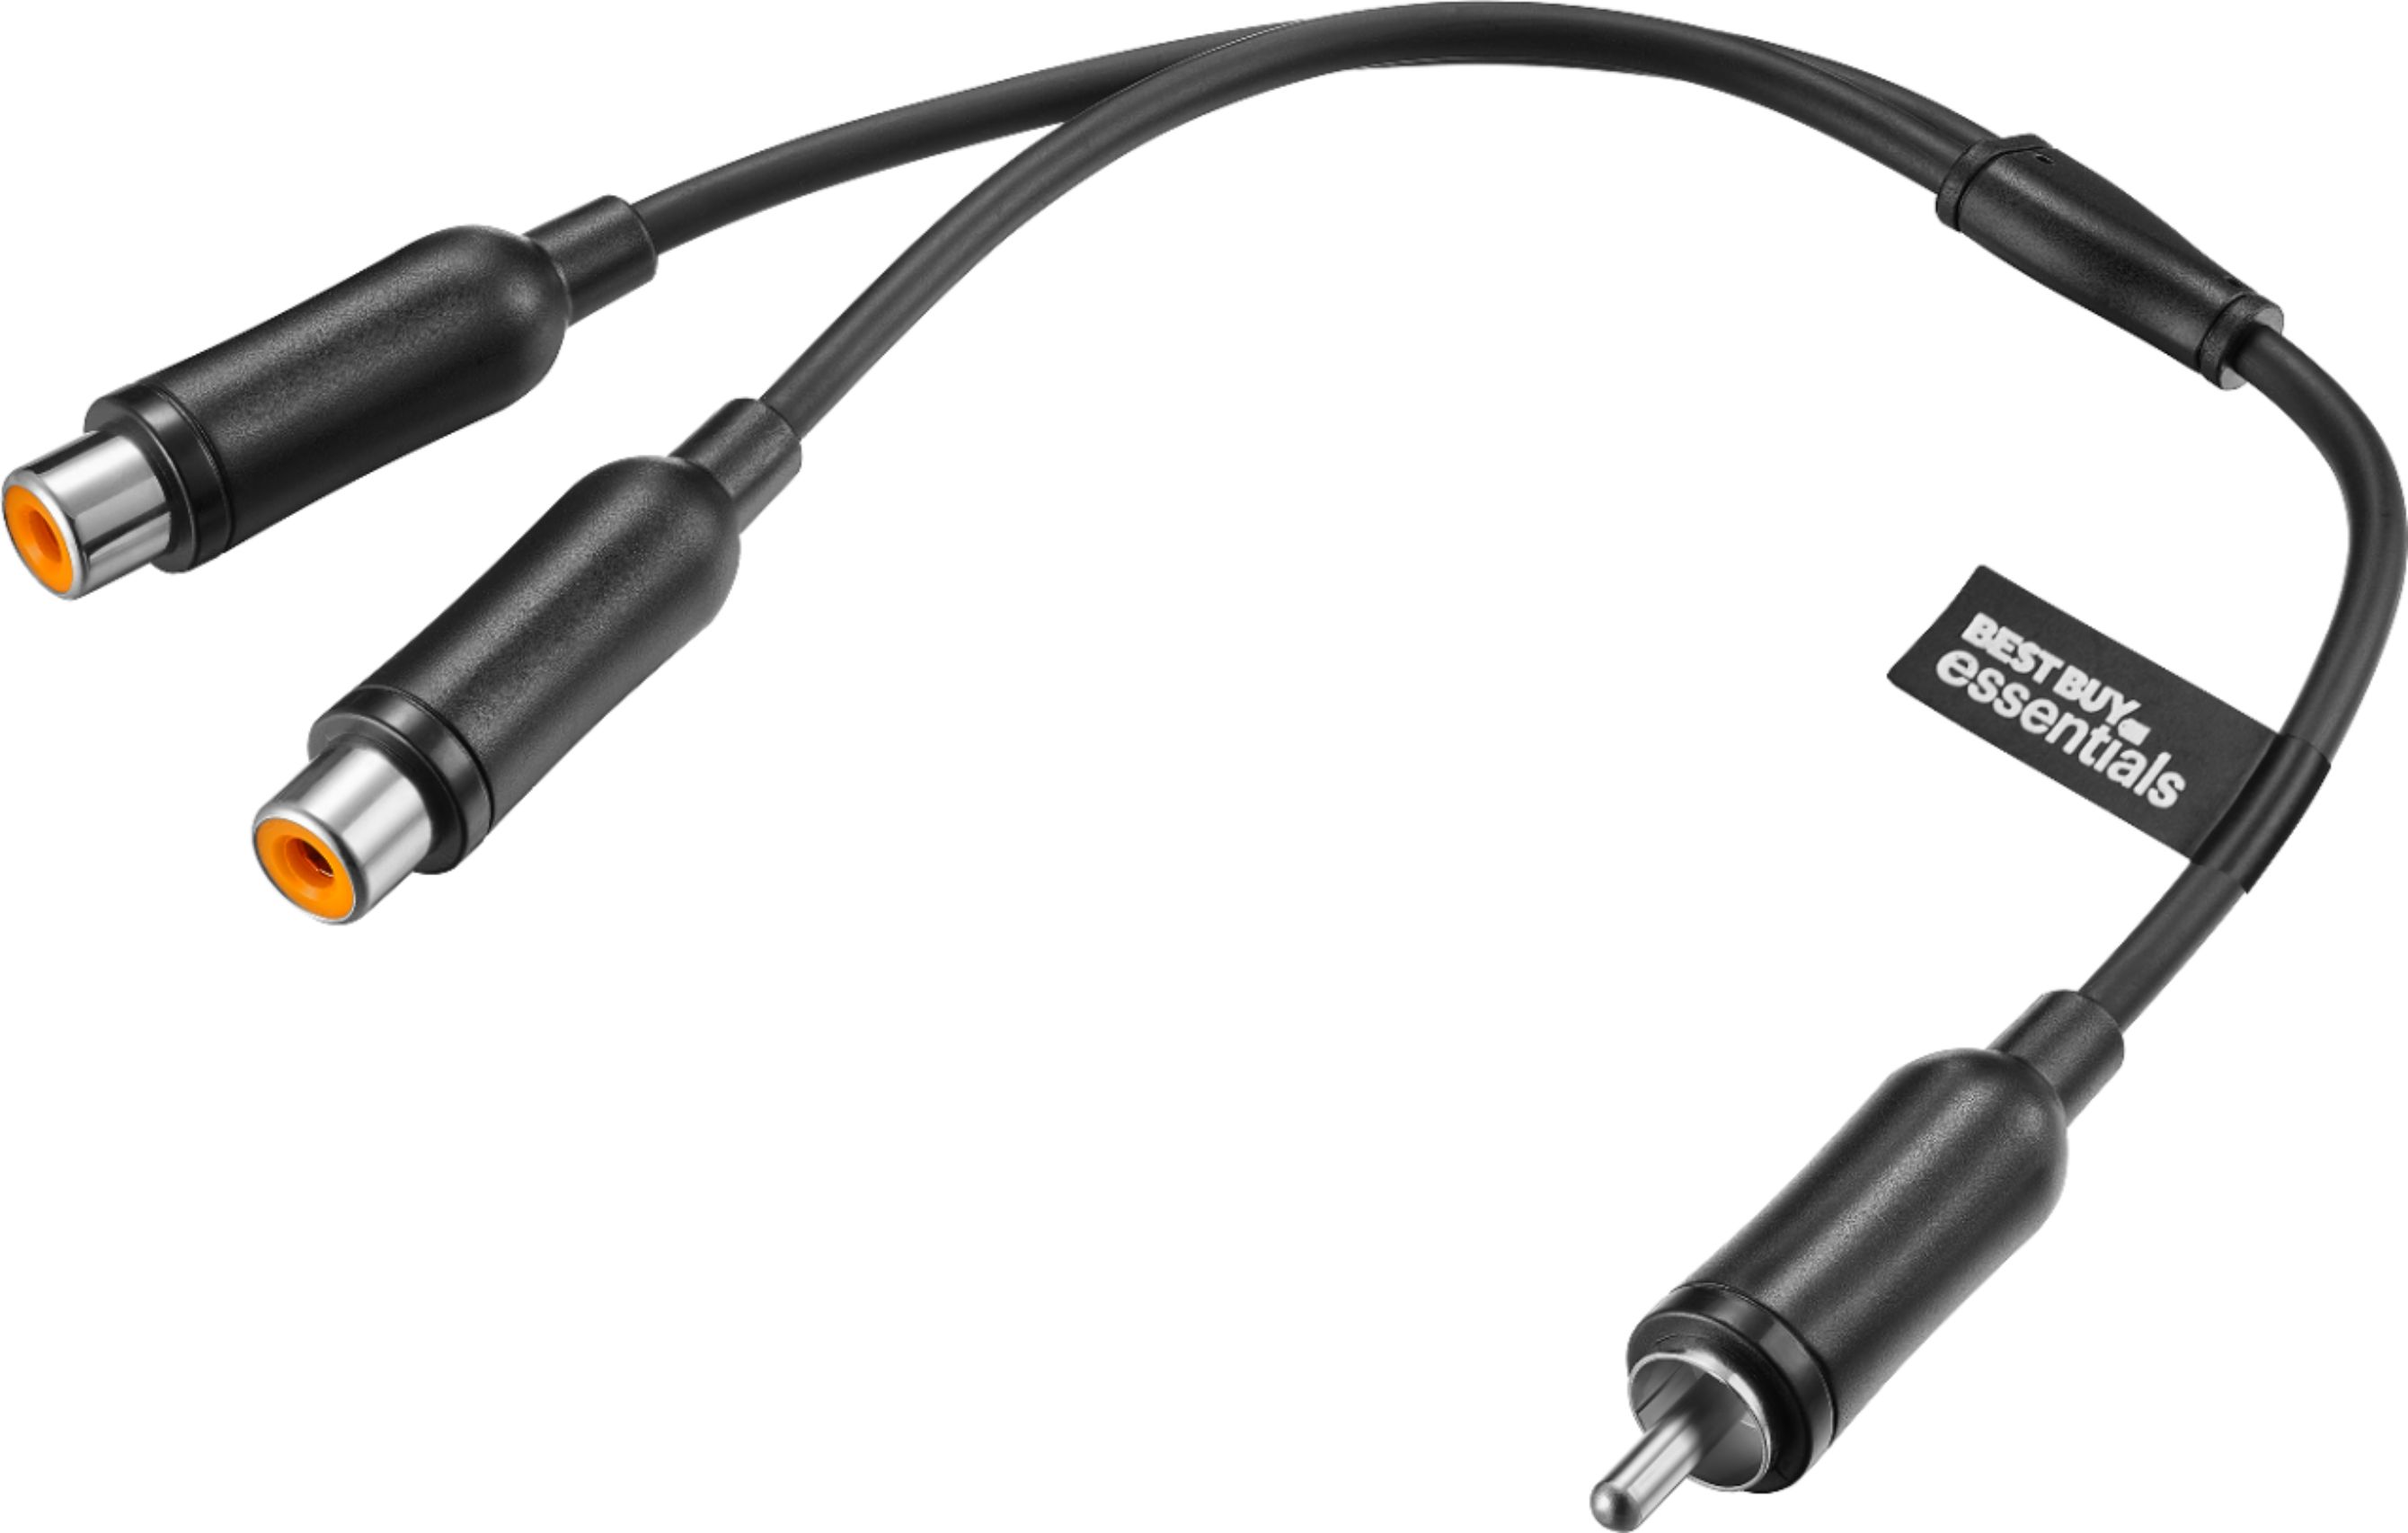 Audio Cables Digital Coaxial 6inch RCA Female to 2-RCA Male Splitter Adapter